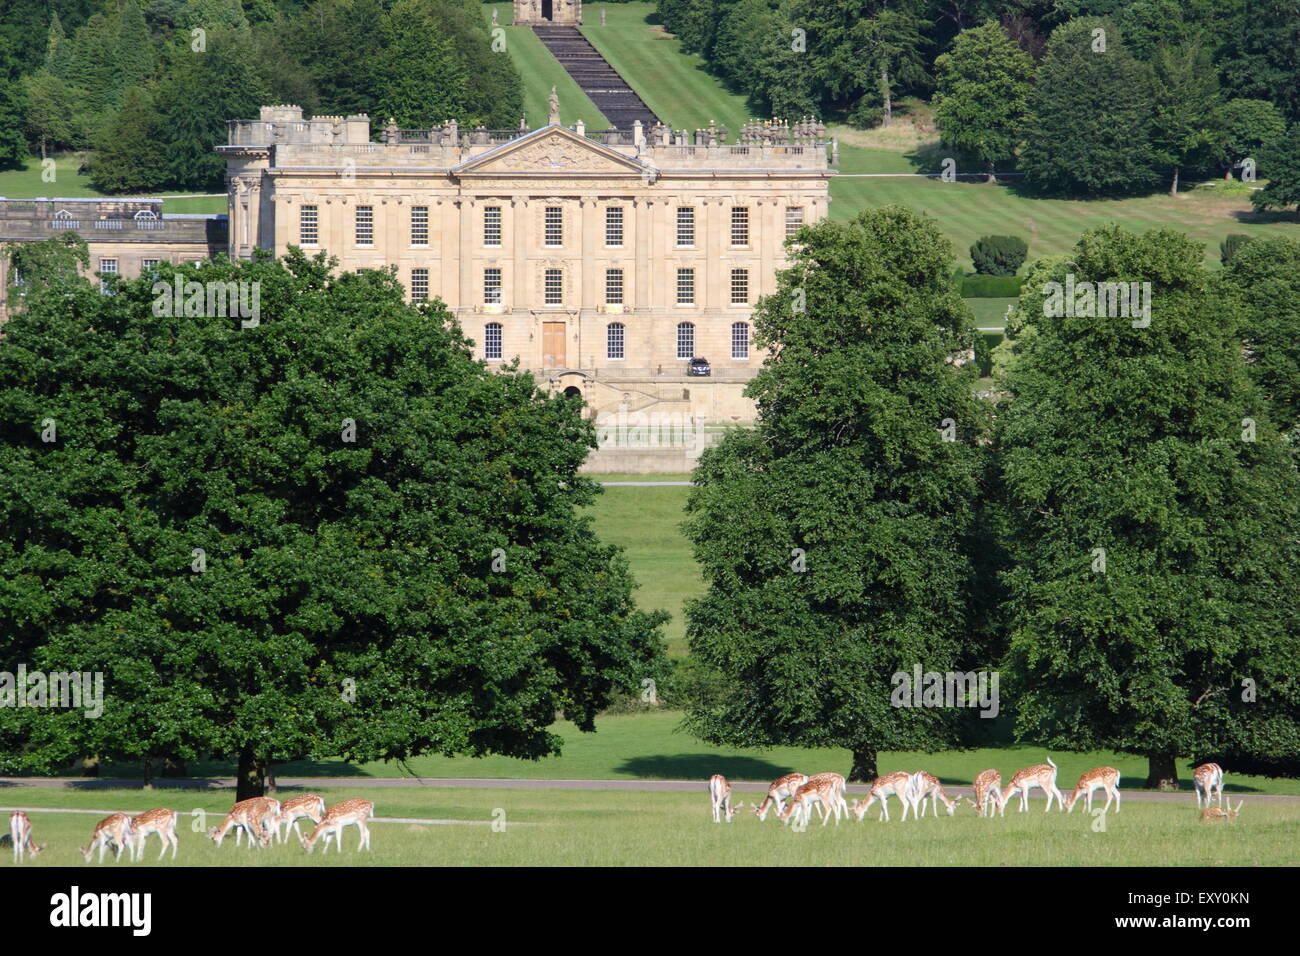 Fallow deer graze in the parkland surrounding Chatsworth House (pictured) on a warm, summer day, Peak District, Derbyshire UK Stock Photo